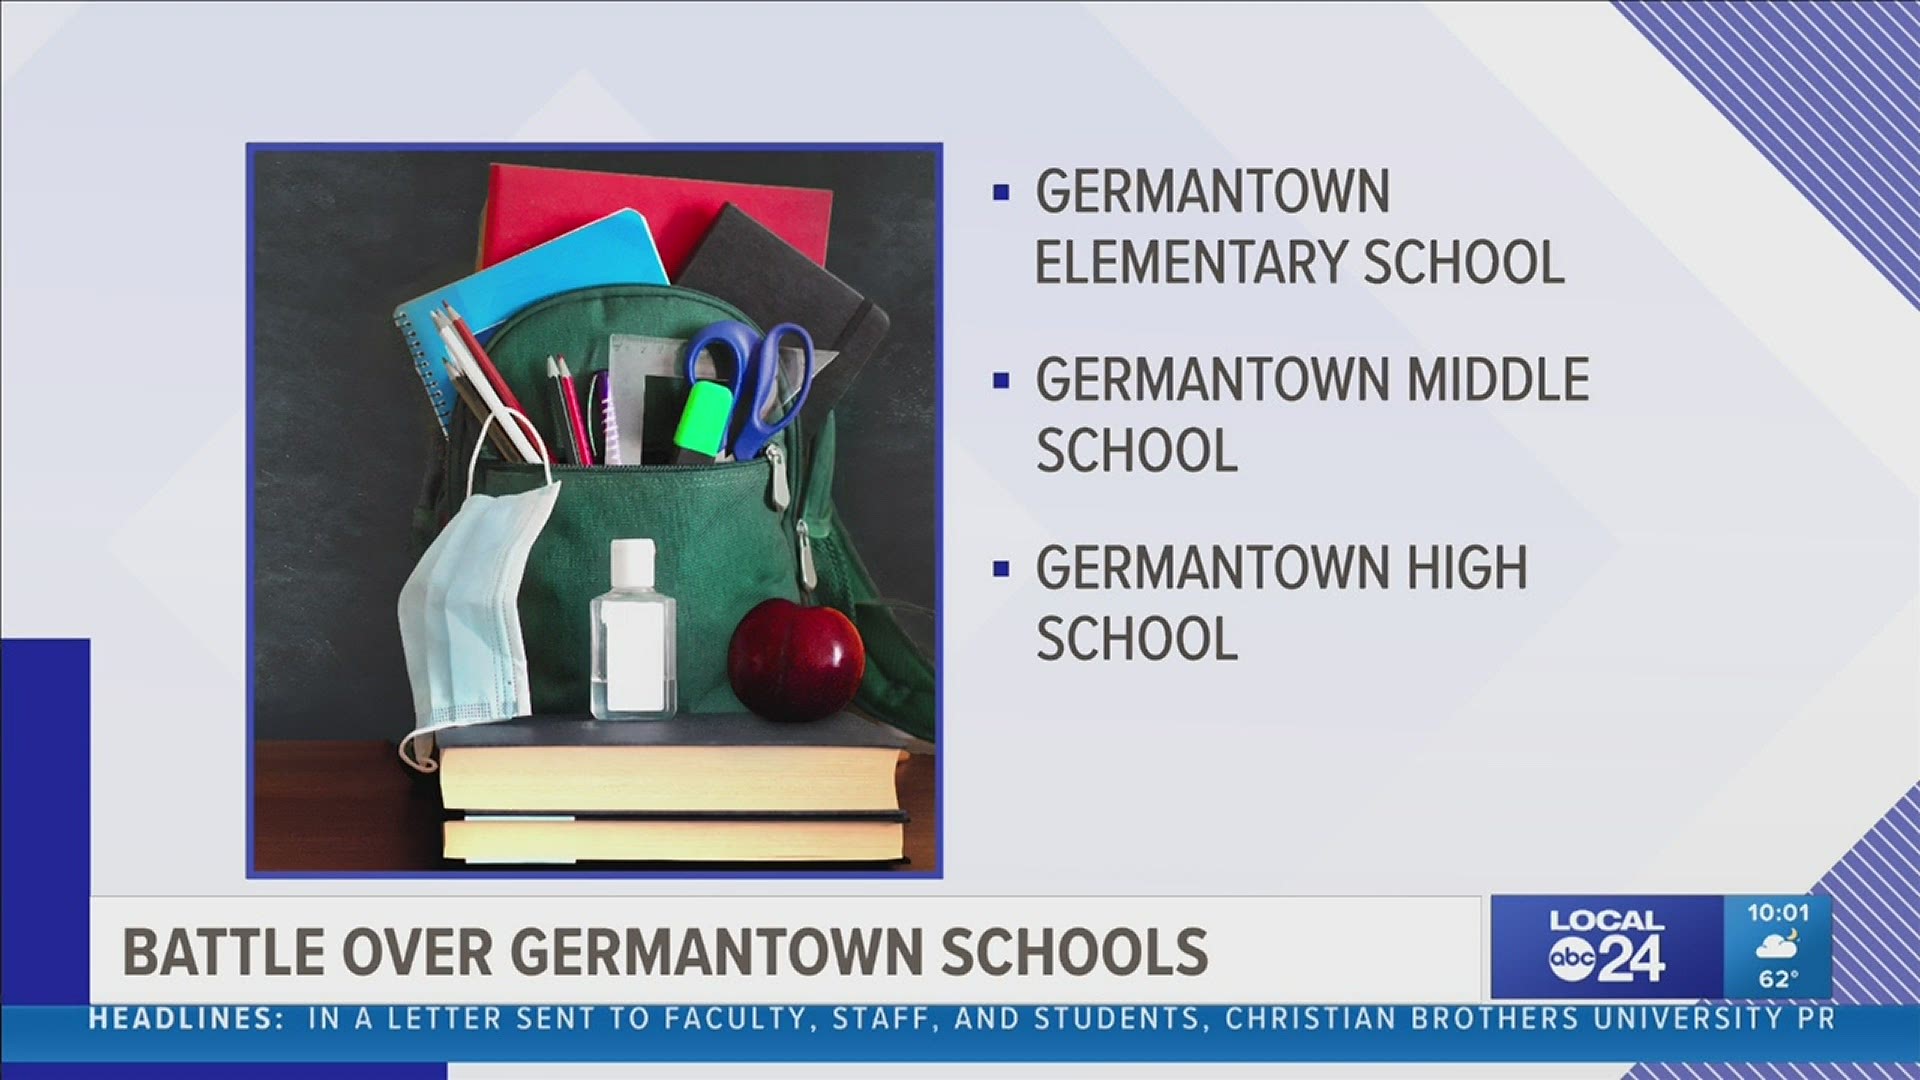 Germantown Municipal School District wants Germantown Elementary, Middle, and High School from Shelby County Schools; city supports legislation to do so.